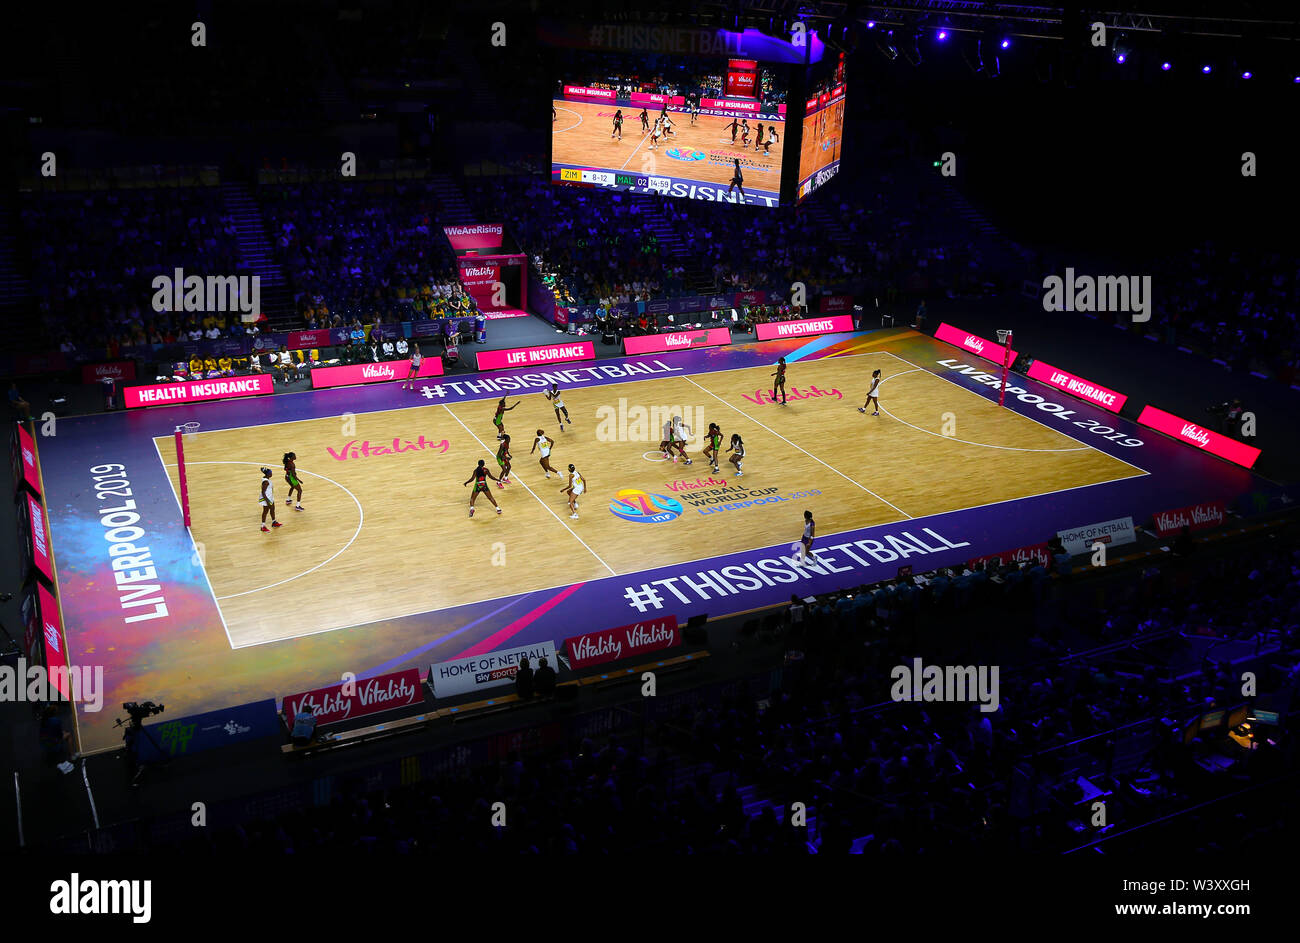 General view of match action between Zimbabwe and Malawi during the Netball World Cup match at the M&S Bank Arena, Liverpool. Stock Photo